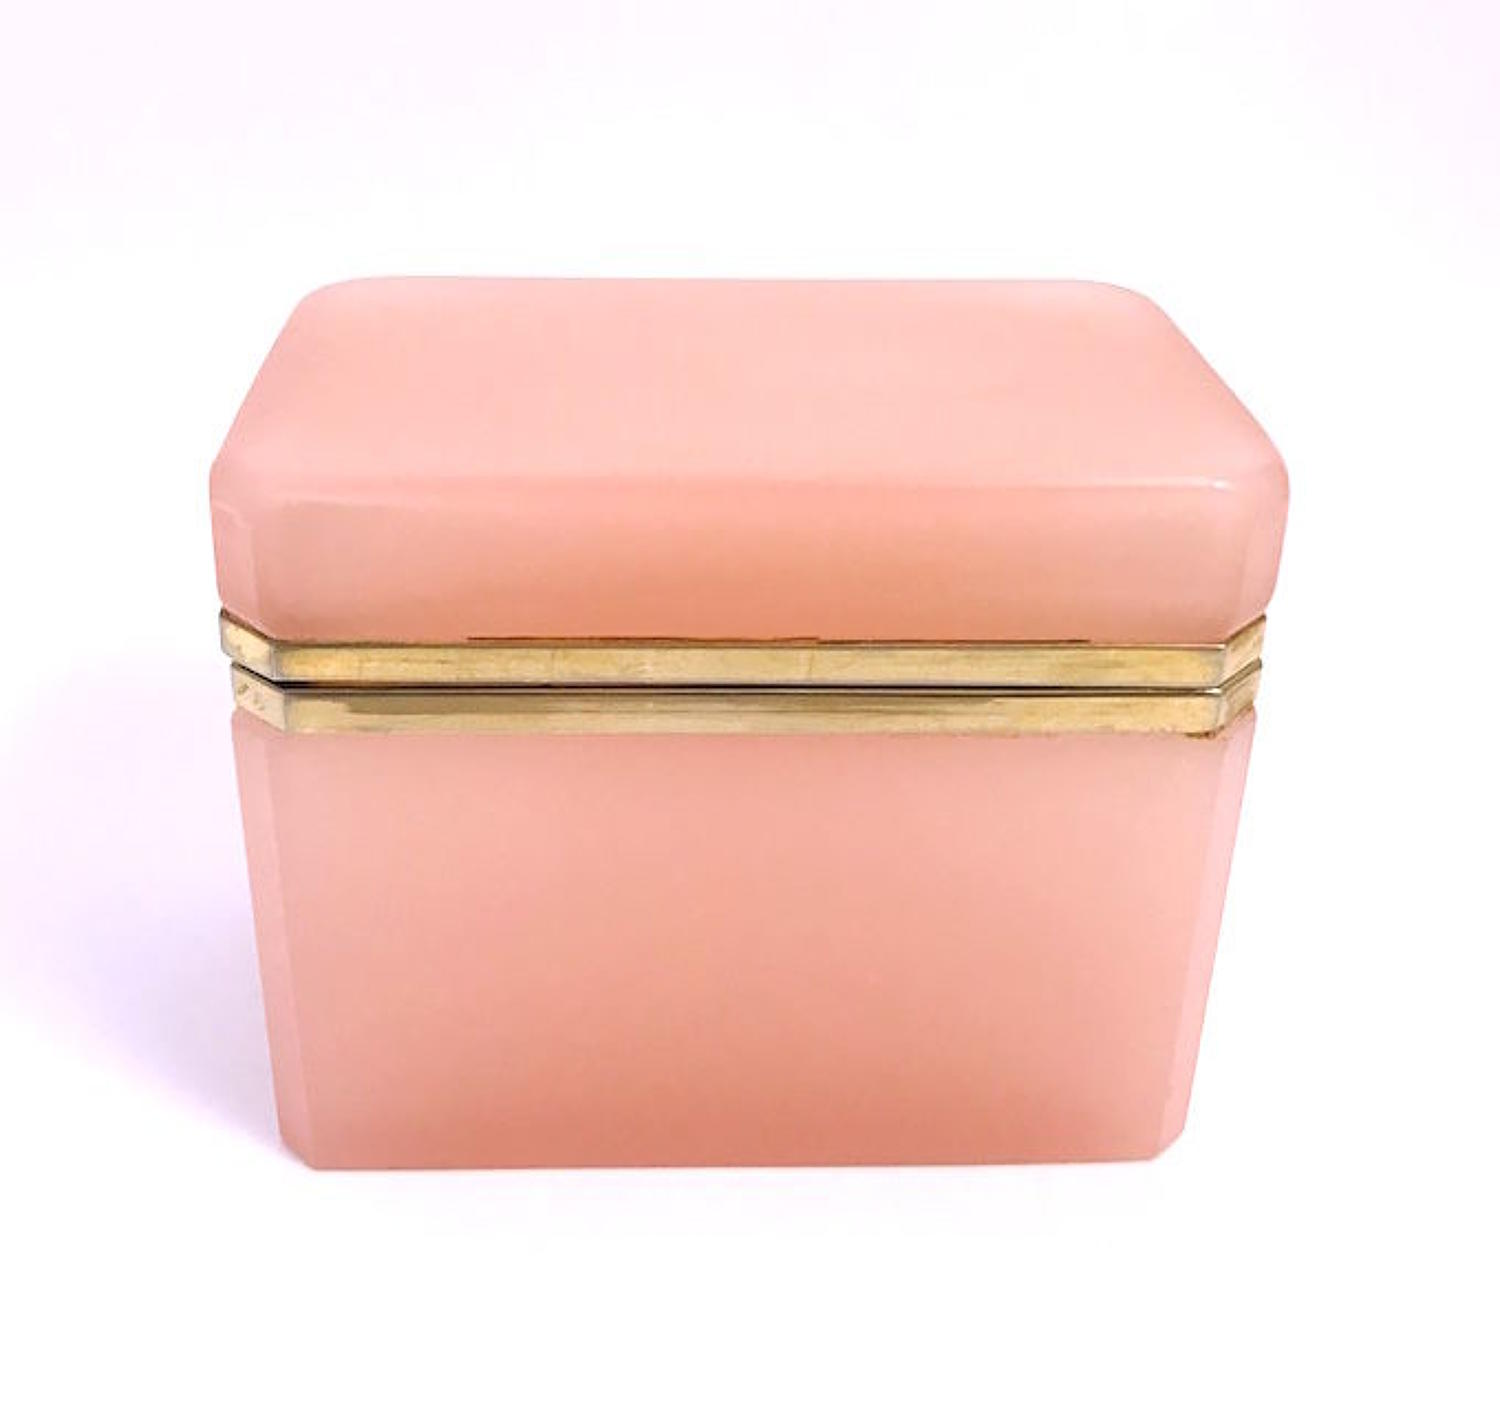 Vintage Italian Murano Pink Opaline Glass Casket Box with Smooth Mount